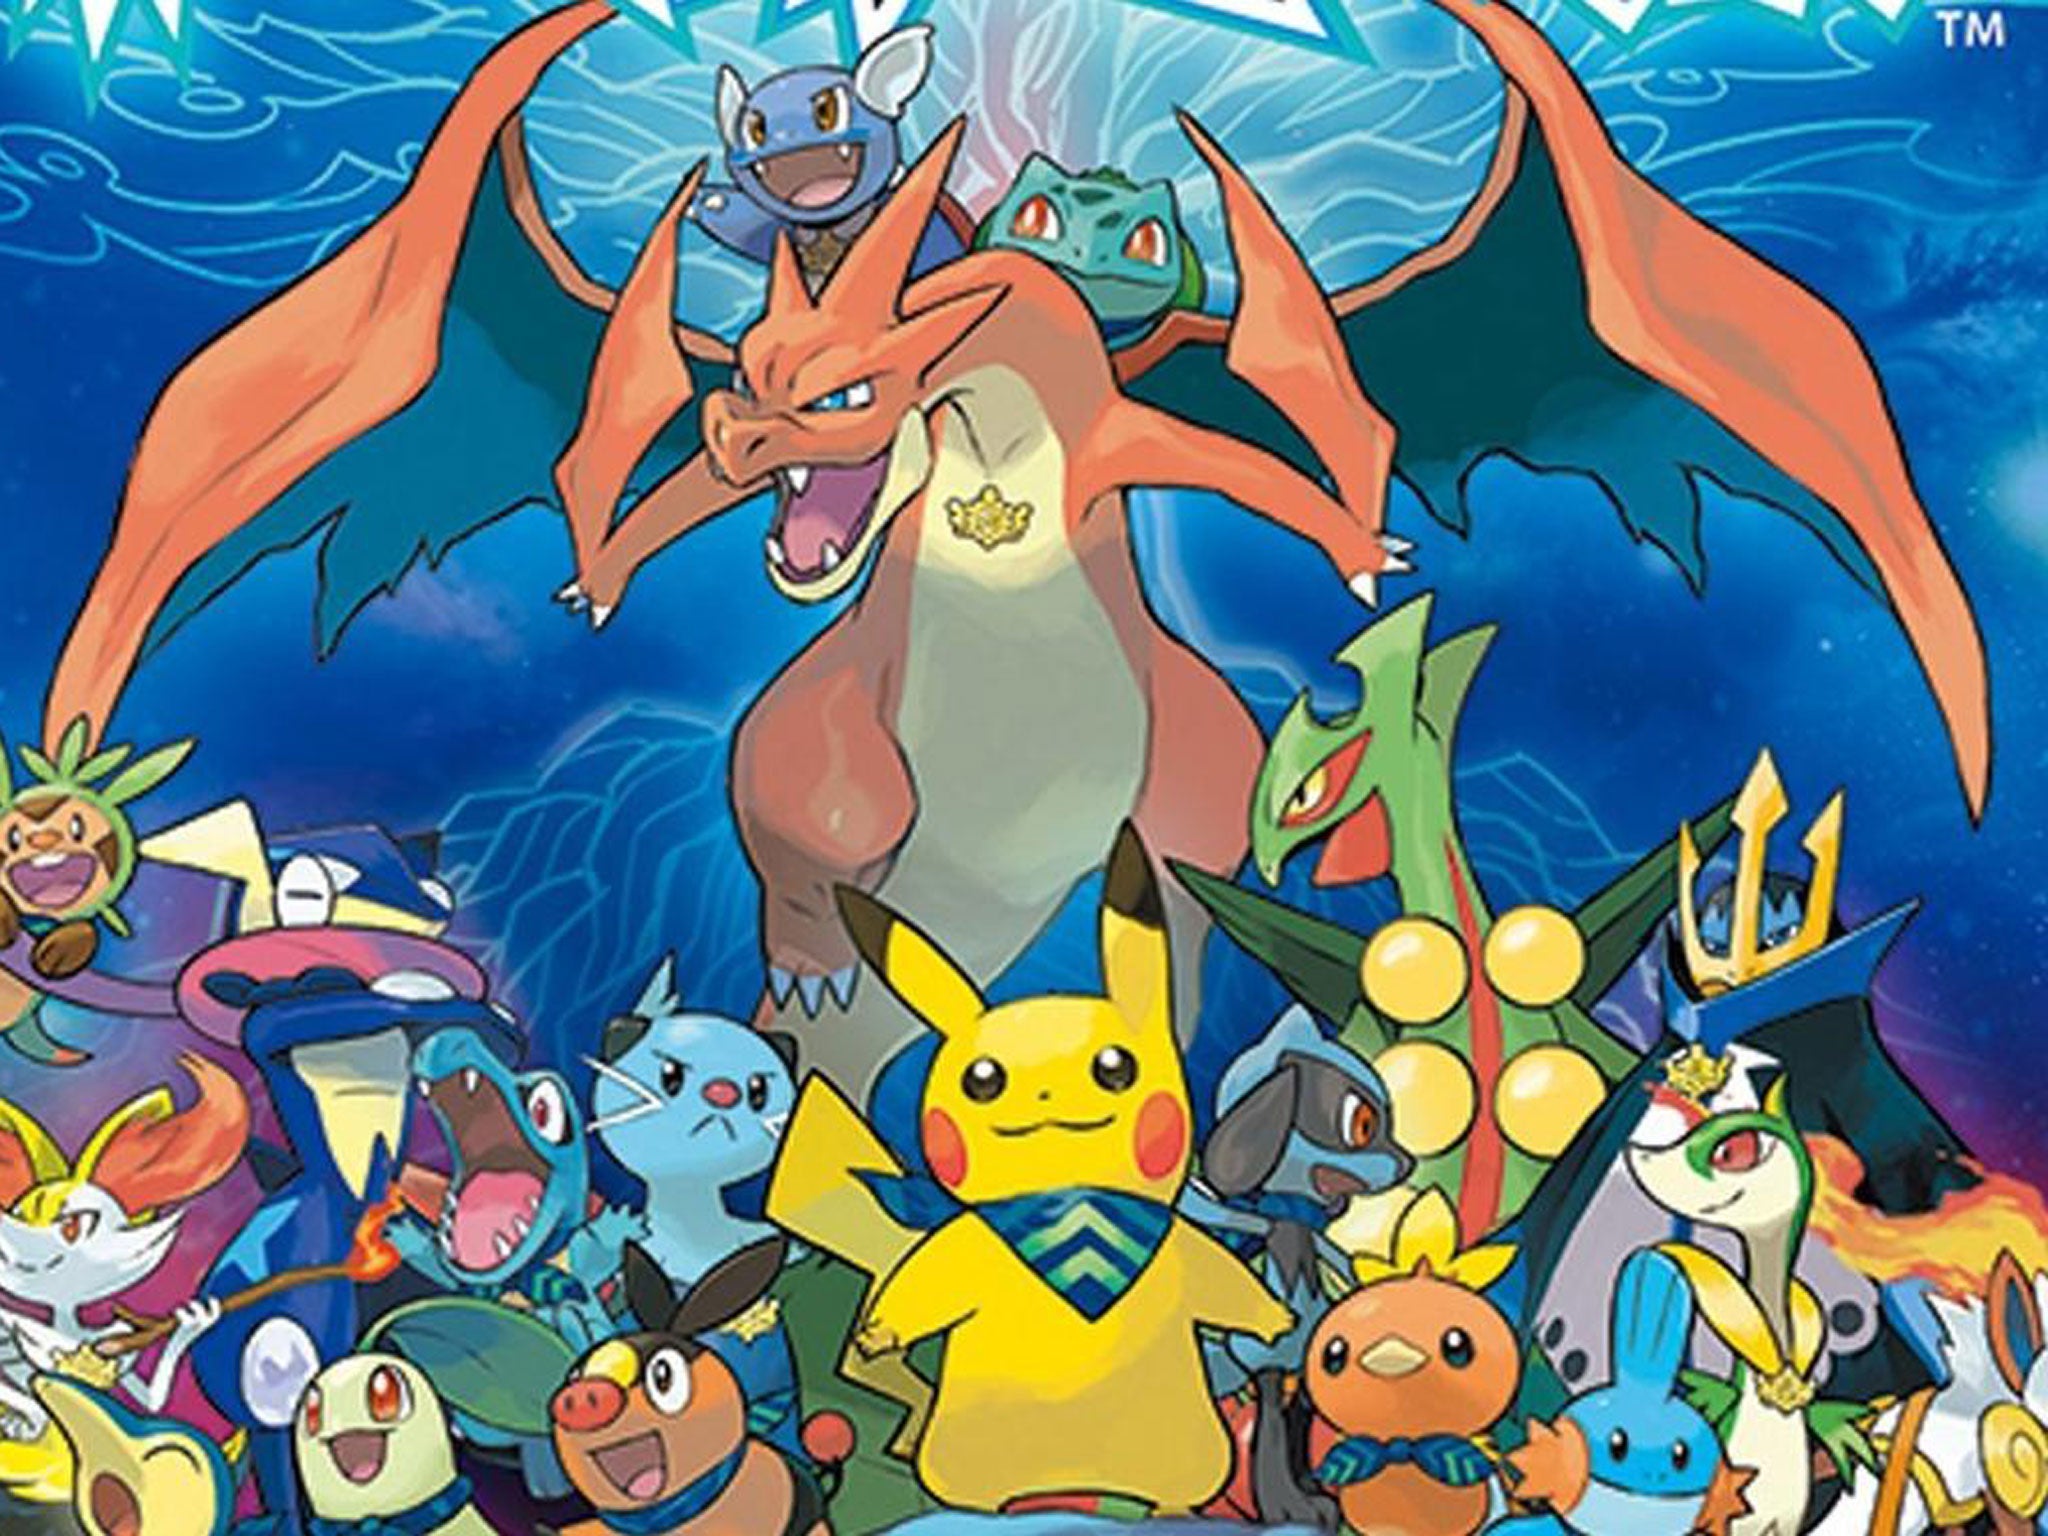 Pokemon Super Mystery Dungeon continues along the same happy road as those flagship games